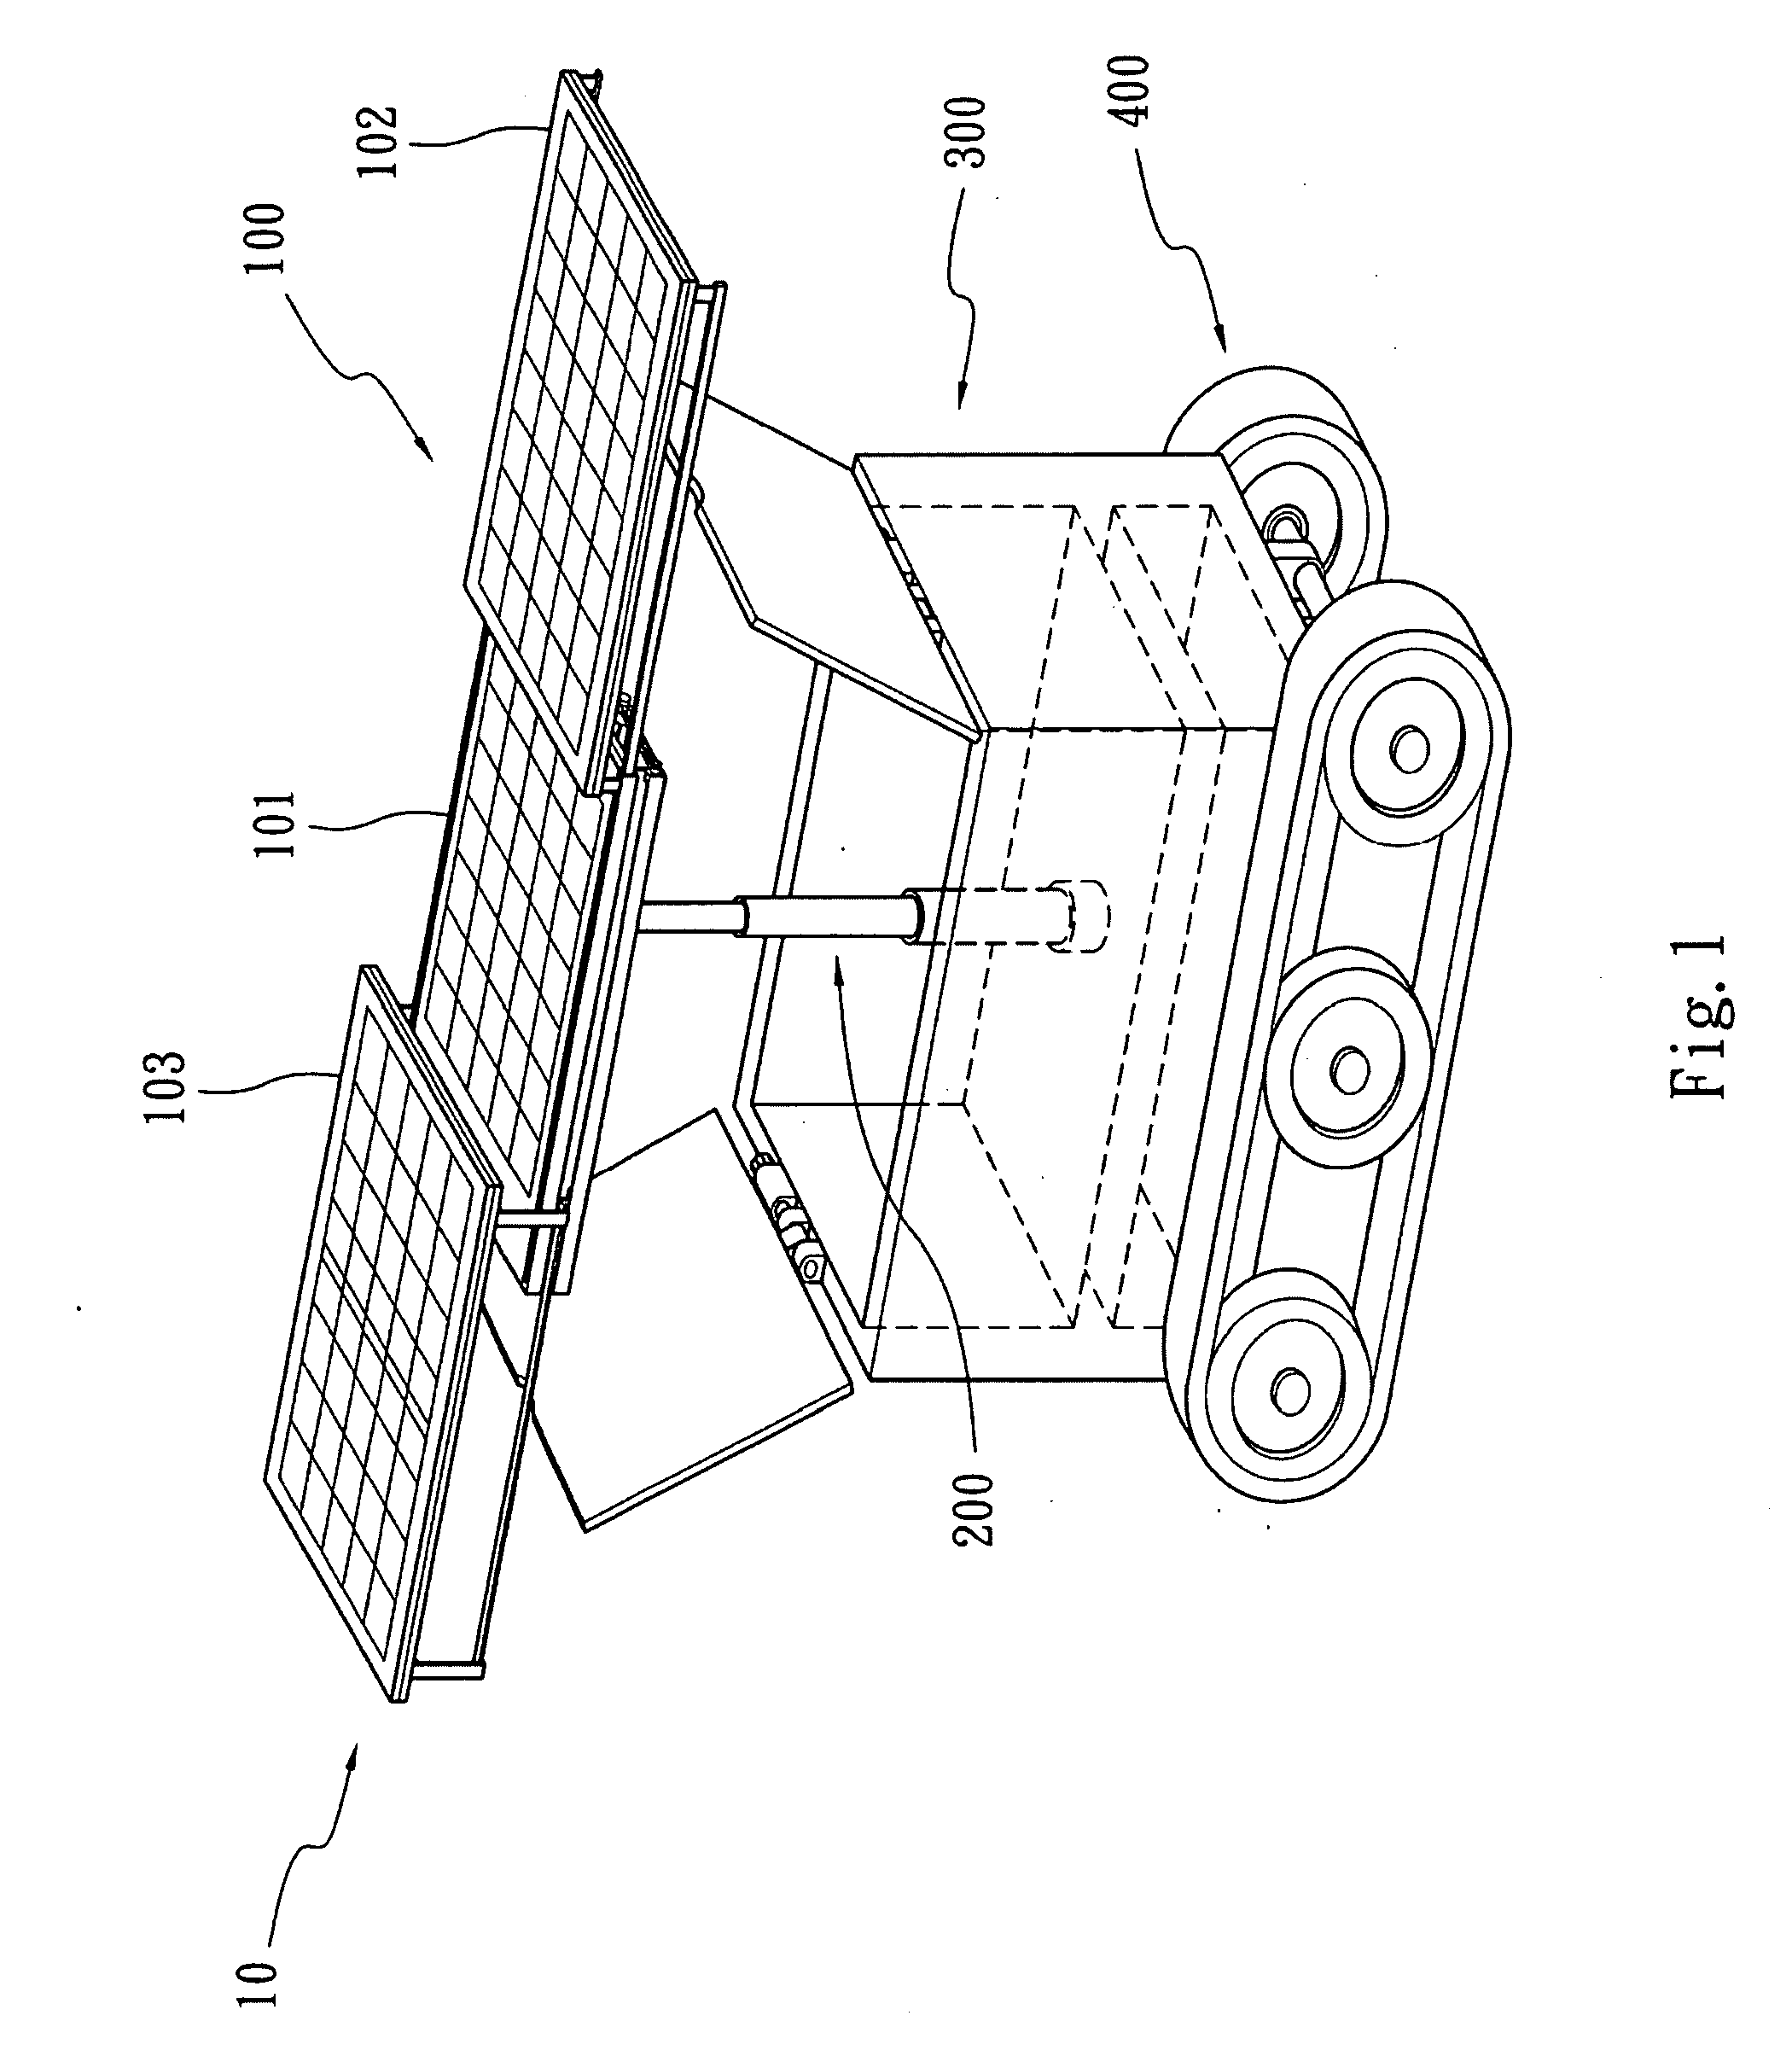 Self-propelled Solar Tracking Apparatus with Multi-layer Solar Panel